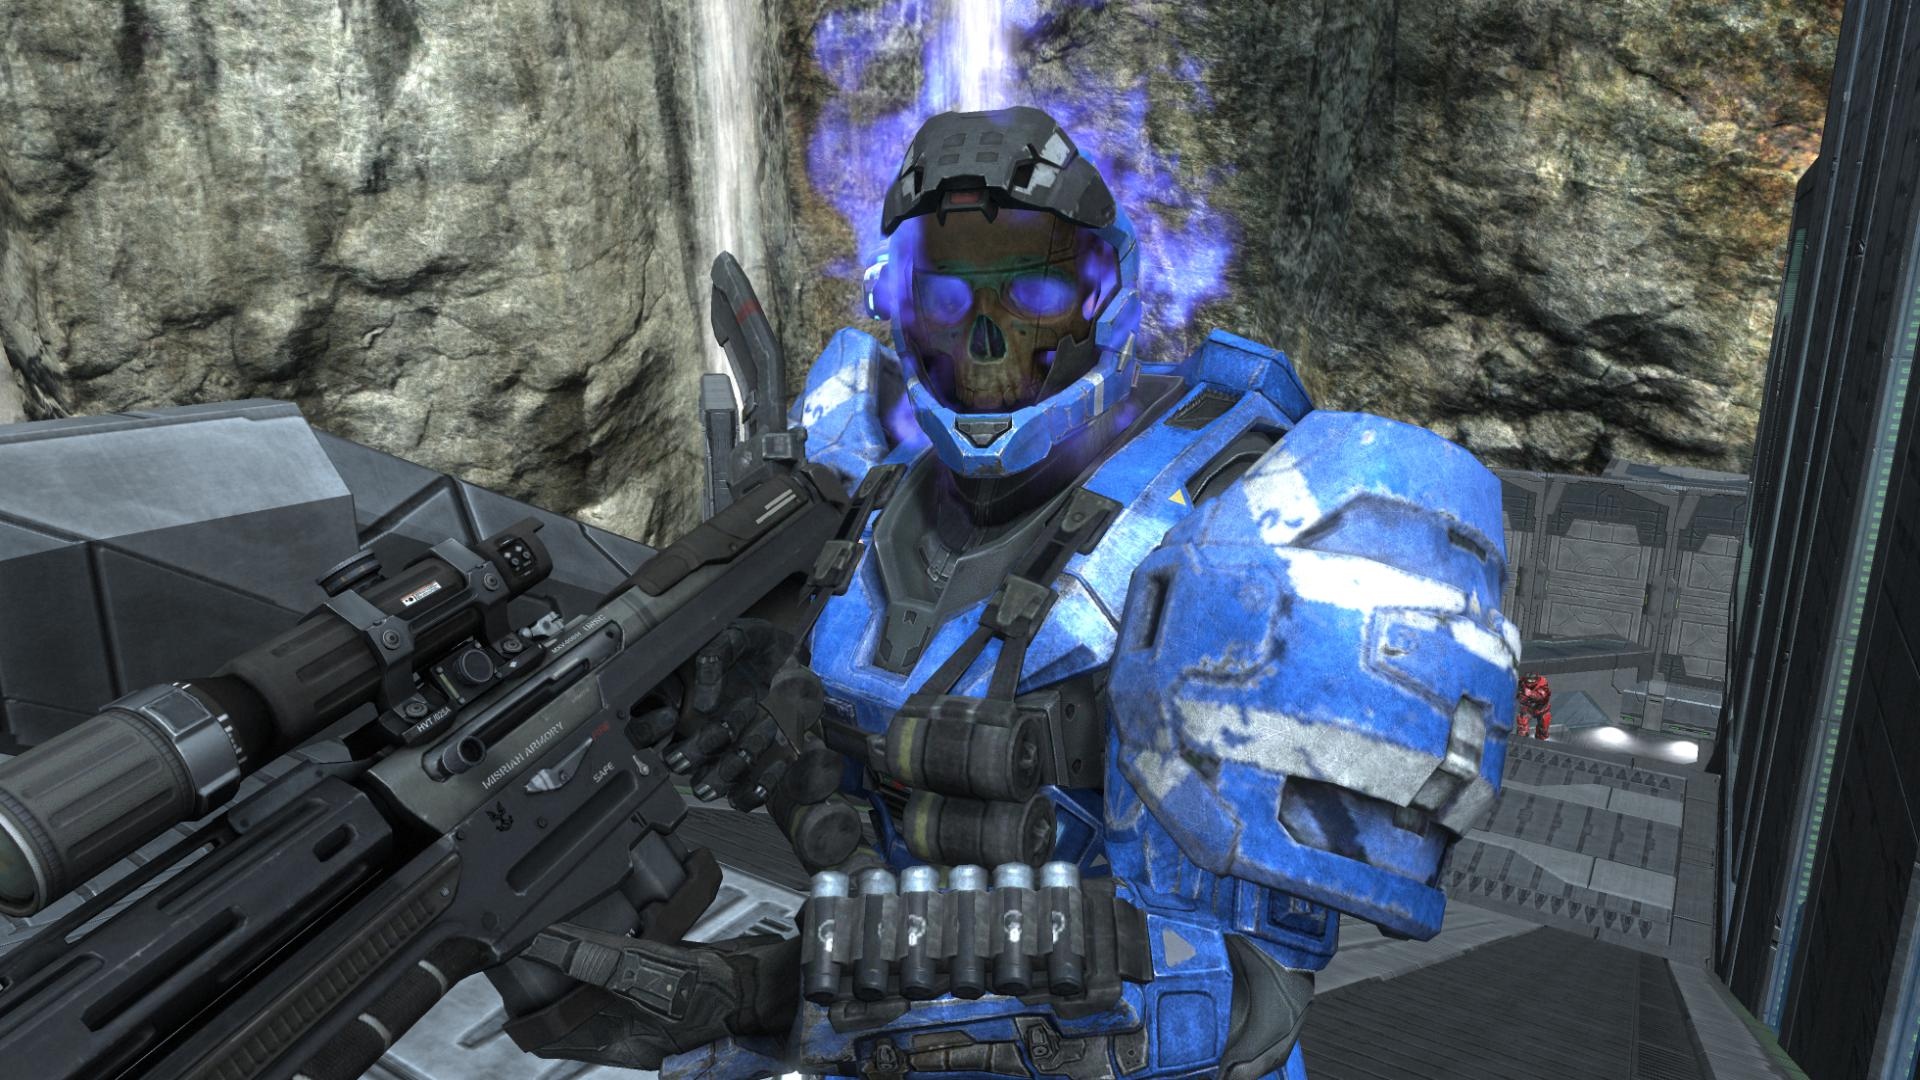 A screenshot of a player in Halo: Reach equipped with various high-level items, such as the Haunted helmet.